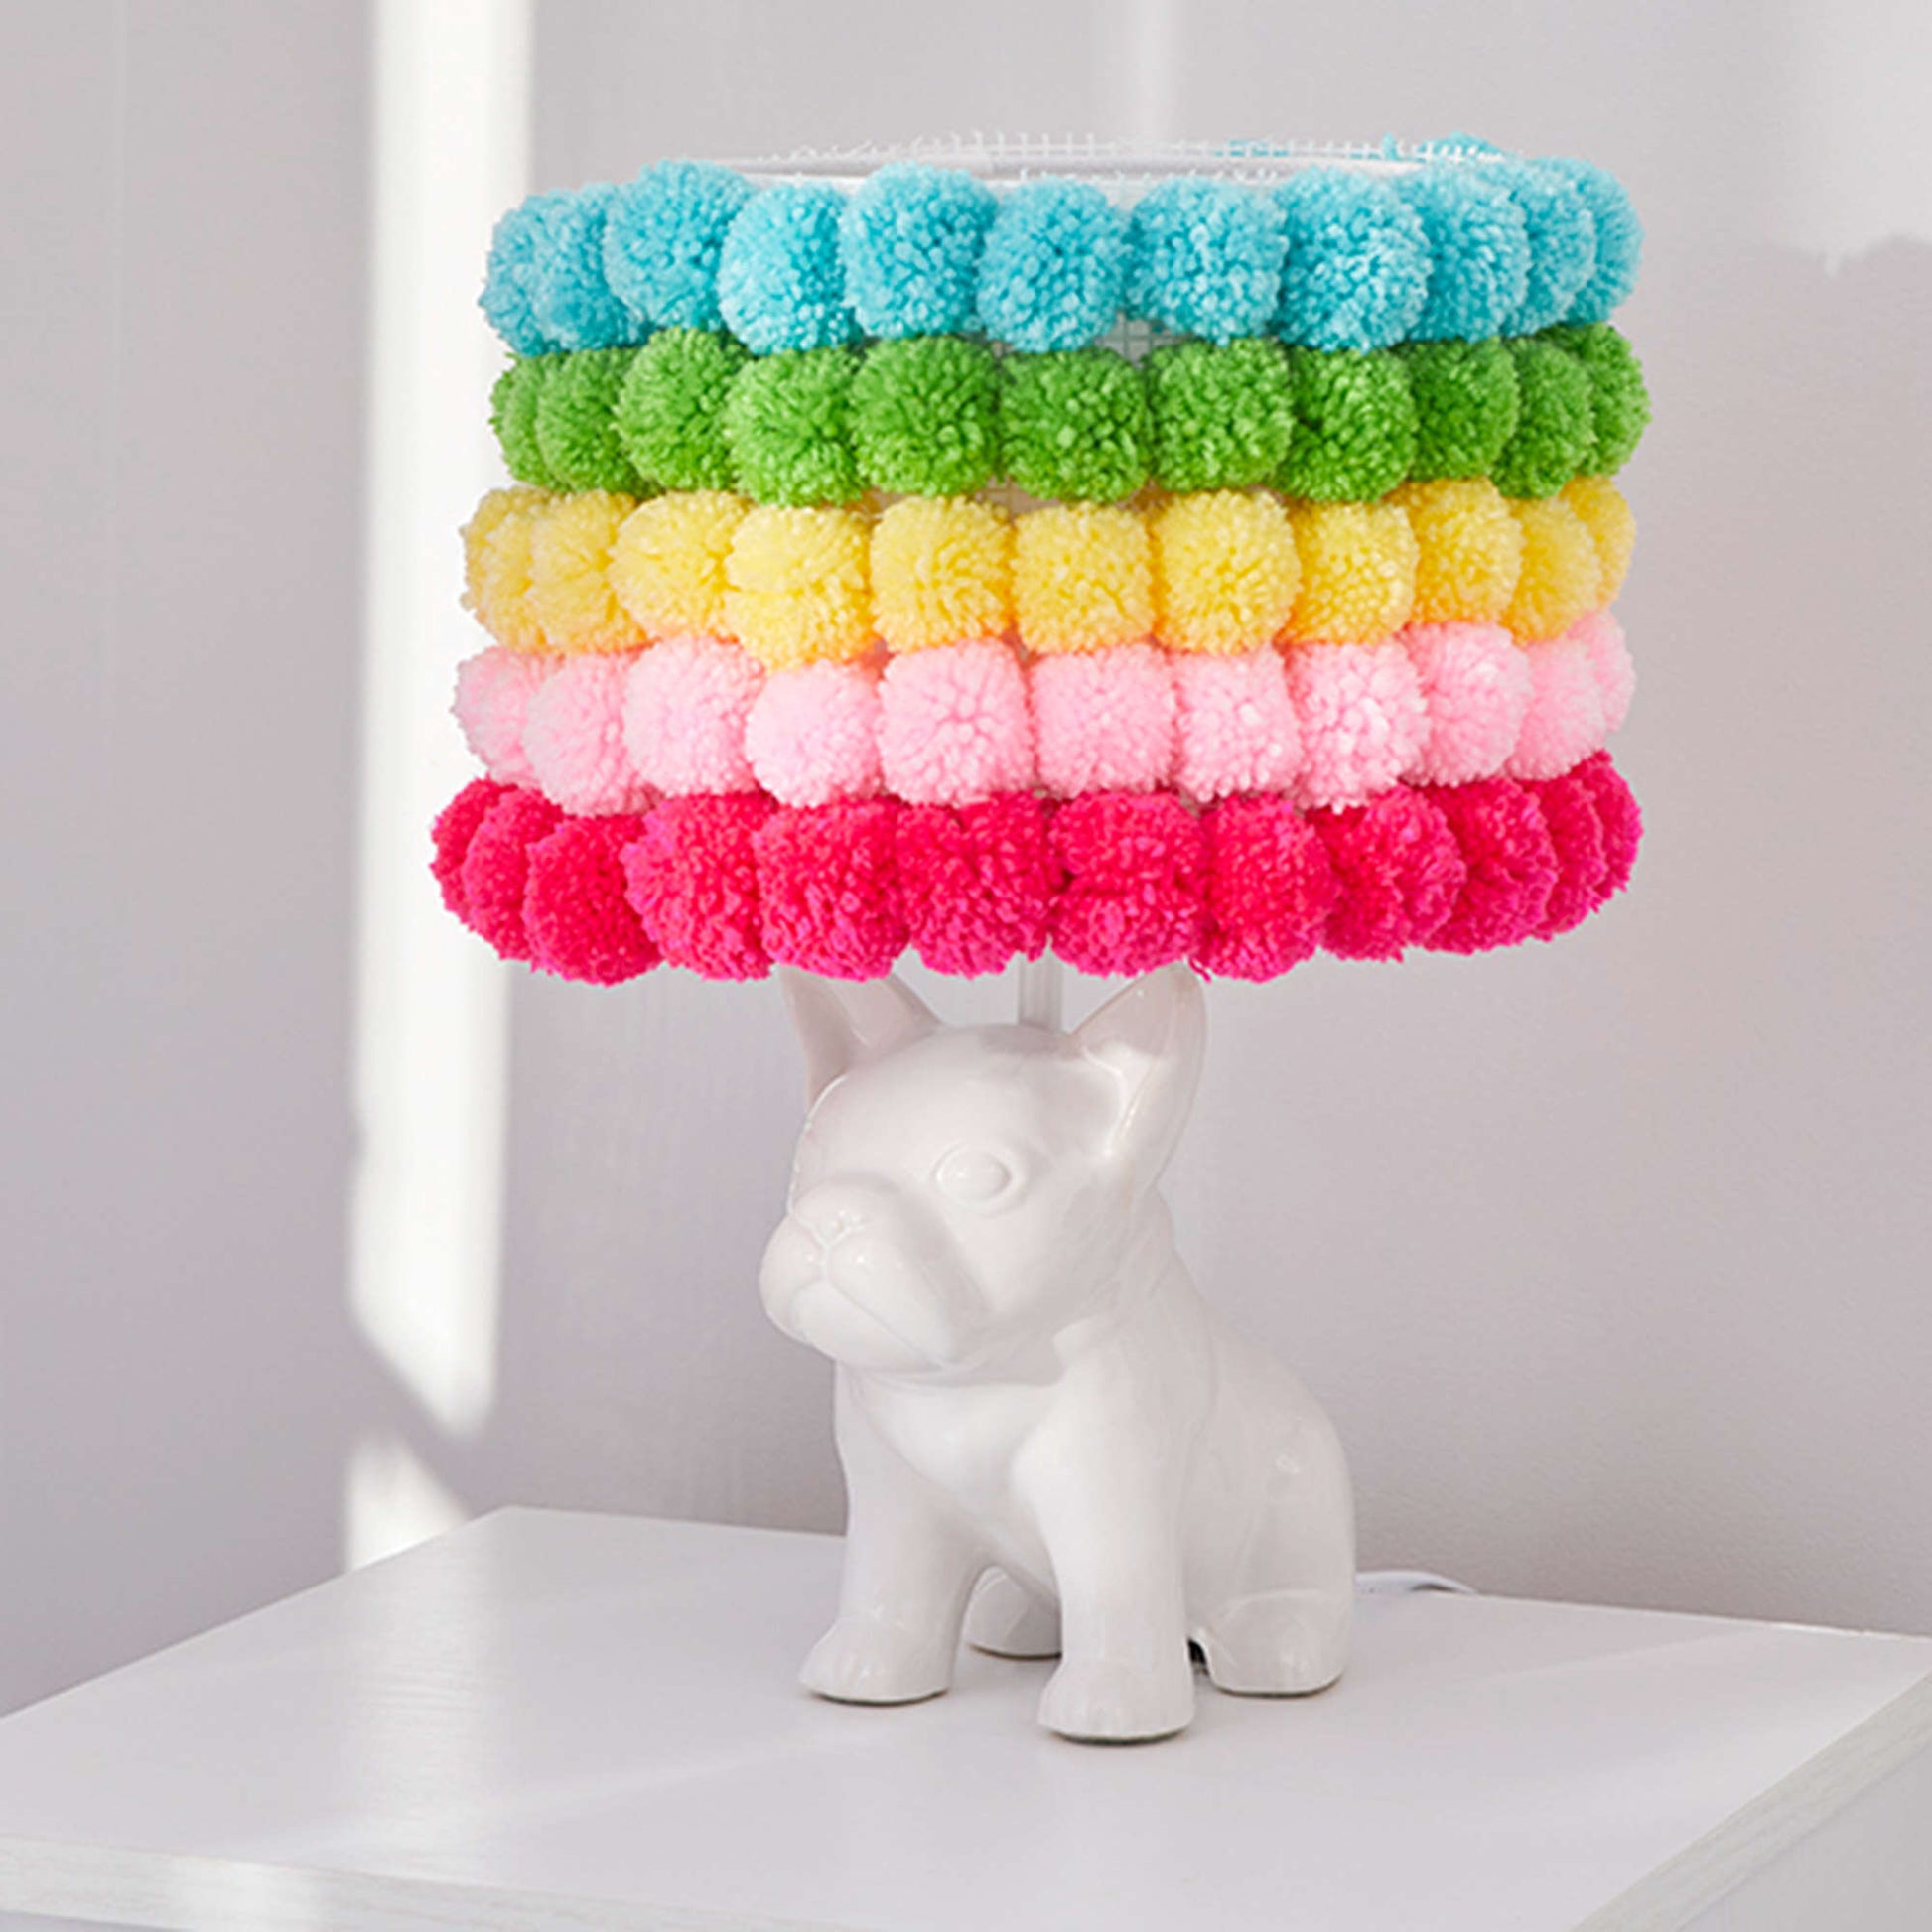 Free Red Heart Pompom Rainbow Lampshade Craft Pattern